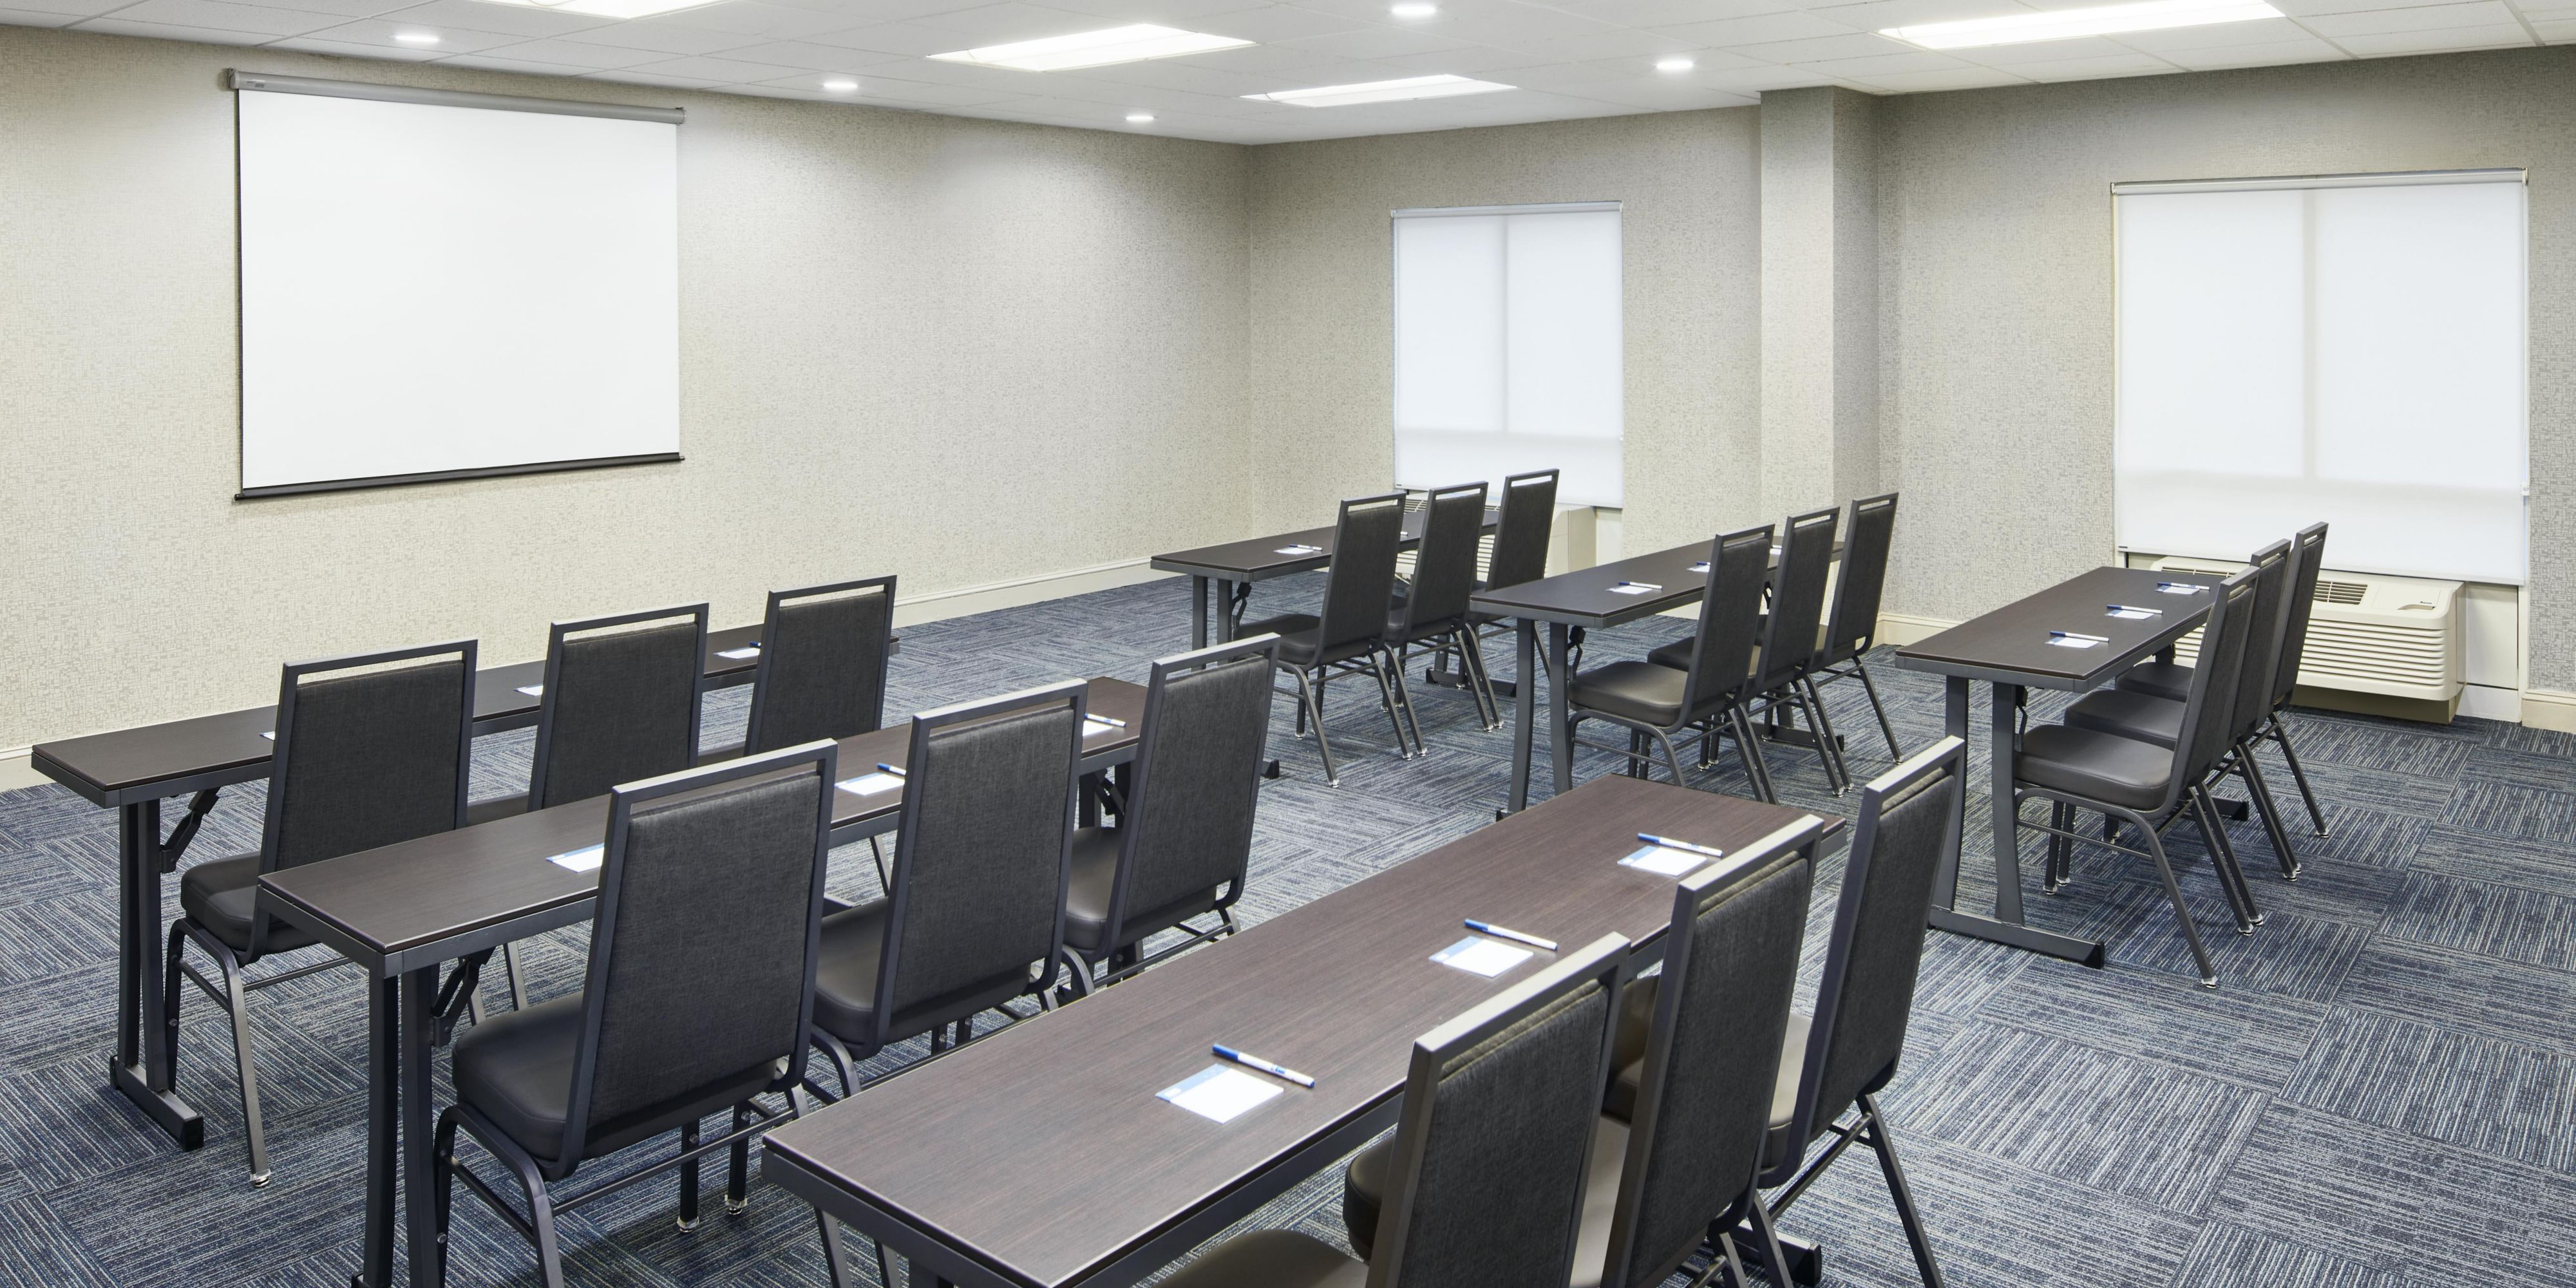 Over 795 SF of meeting space. Own catering welcome. Contact Hotel directly for pricing and capacity guidelines.